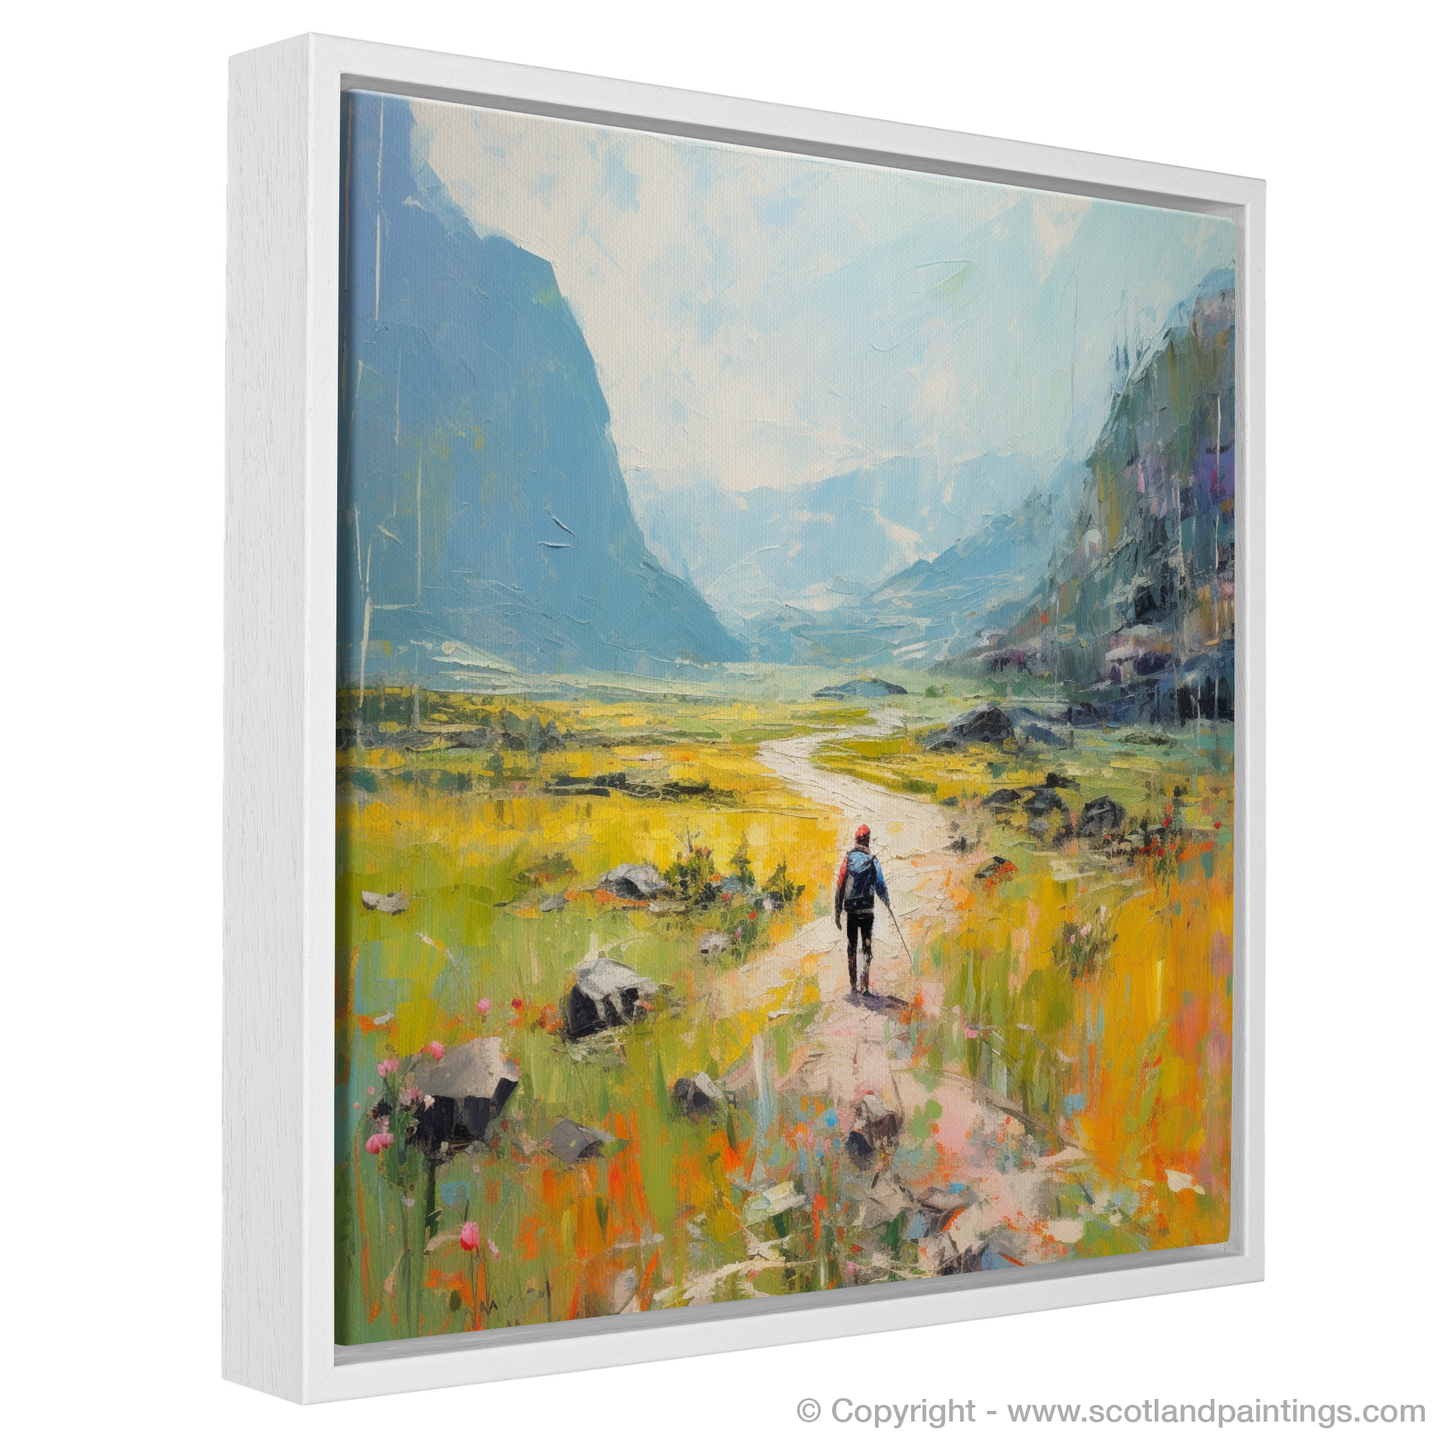 Painting and Art Print of Lone hiker in Glencoe during summer entitled "Highland Wanderer: A Summer Odyssey in Glencoe".